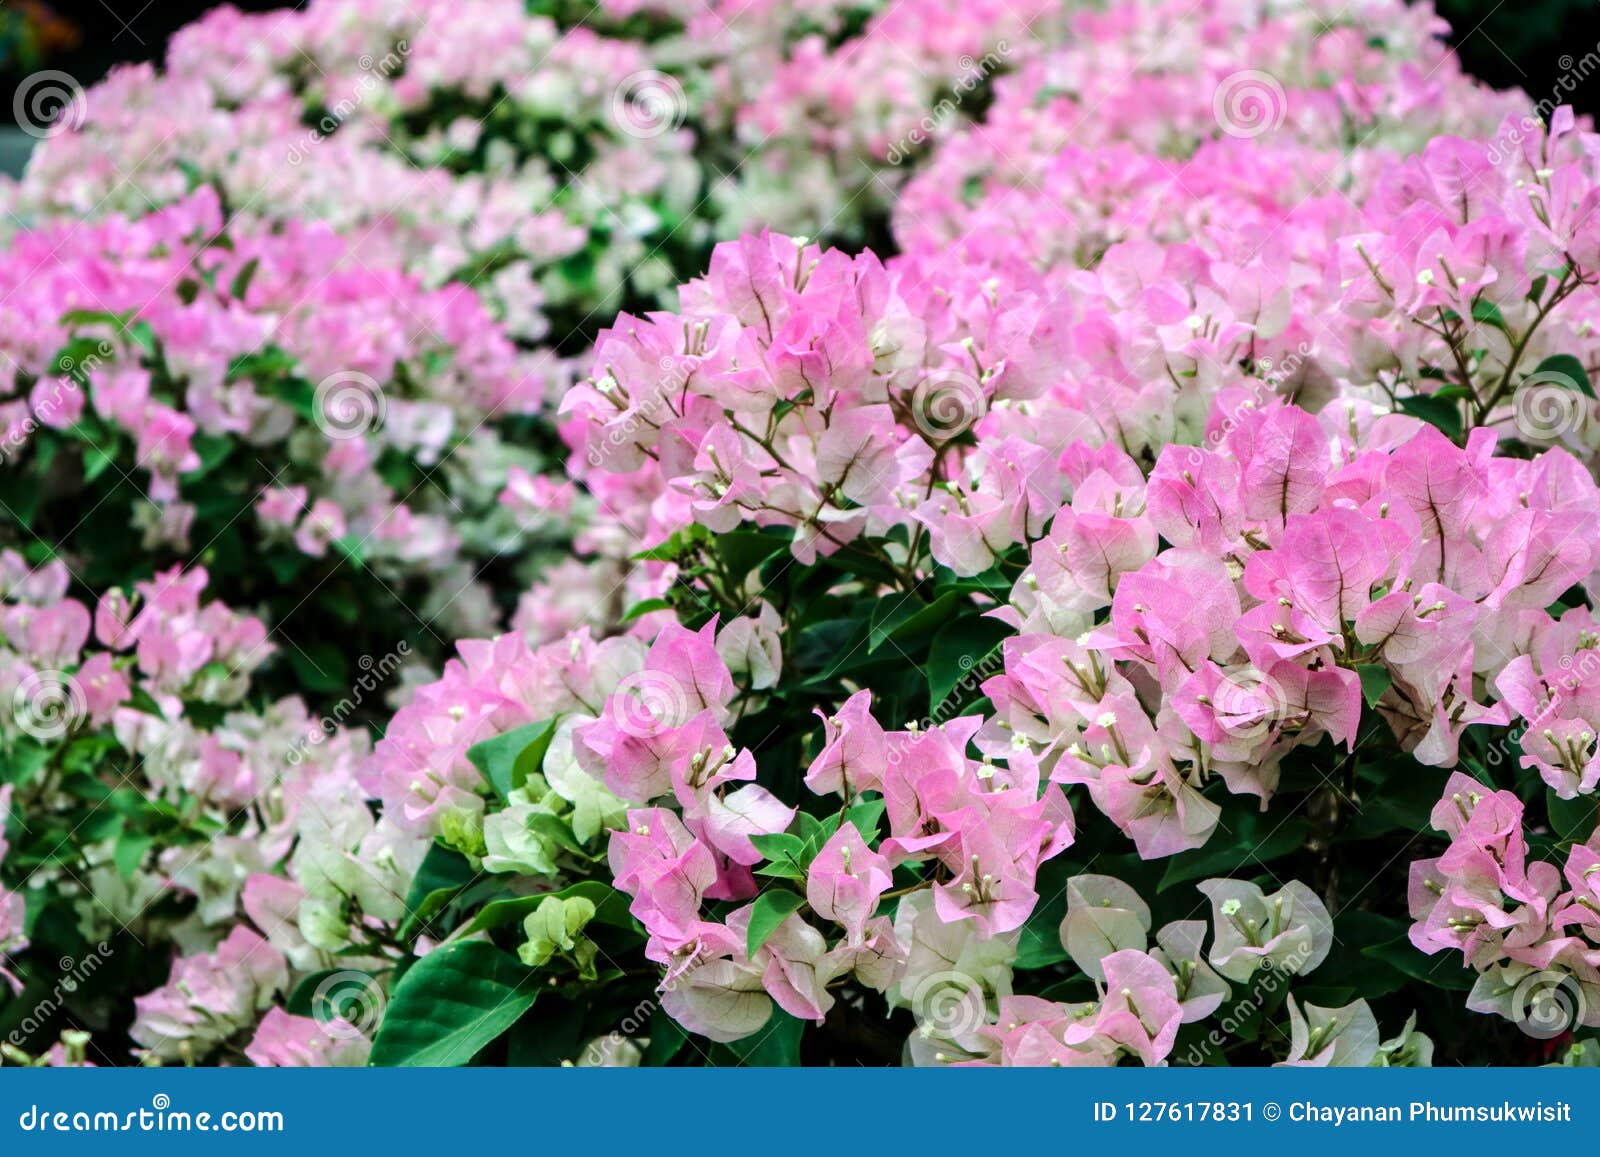 Bougainvillea White Pink Two Tone Color Flower Blooming Stock Image - Image  of bloom, floral: 127617831